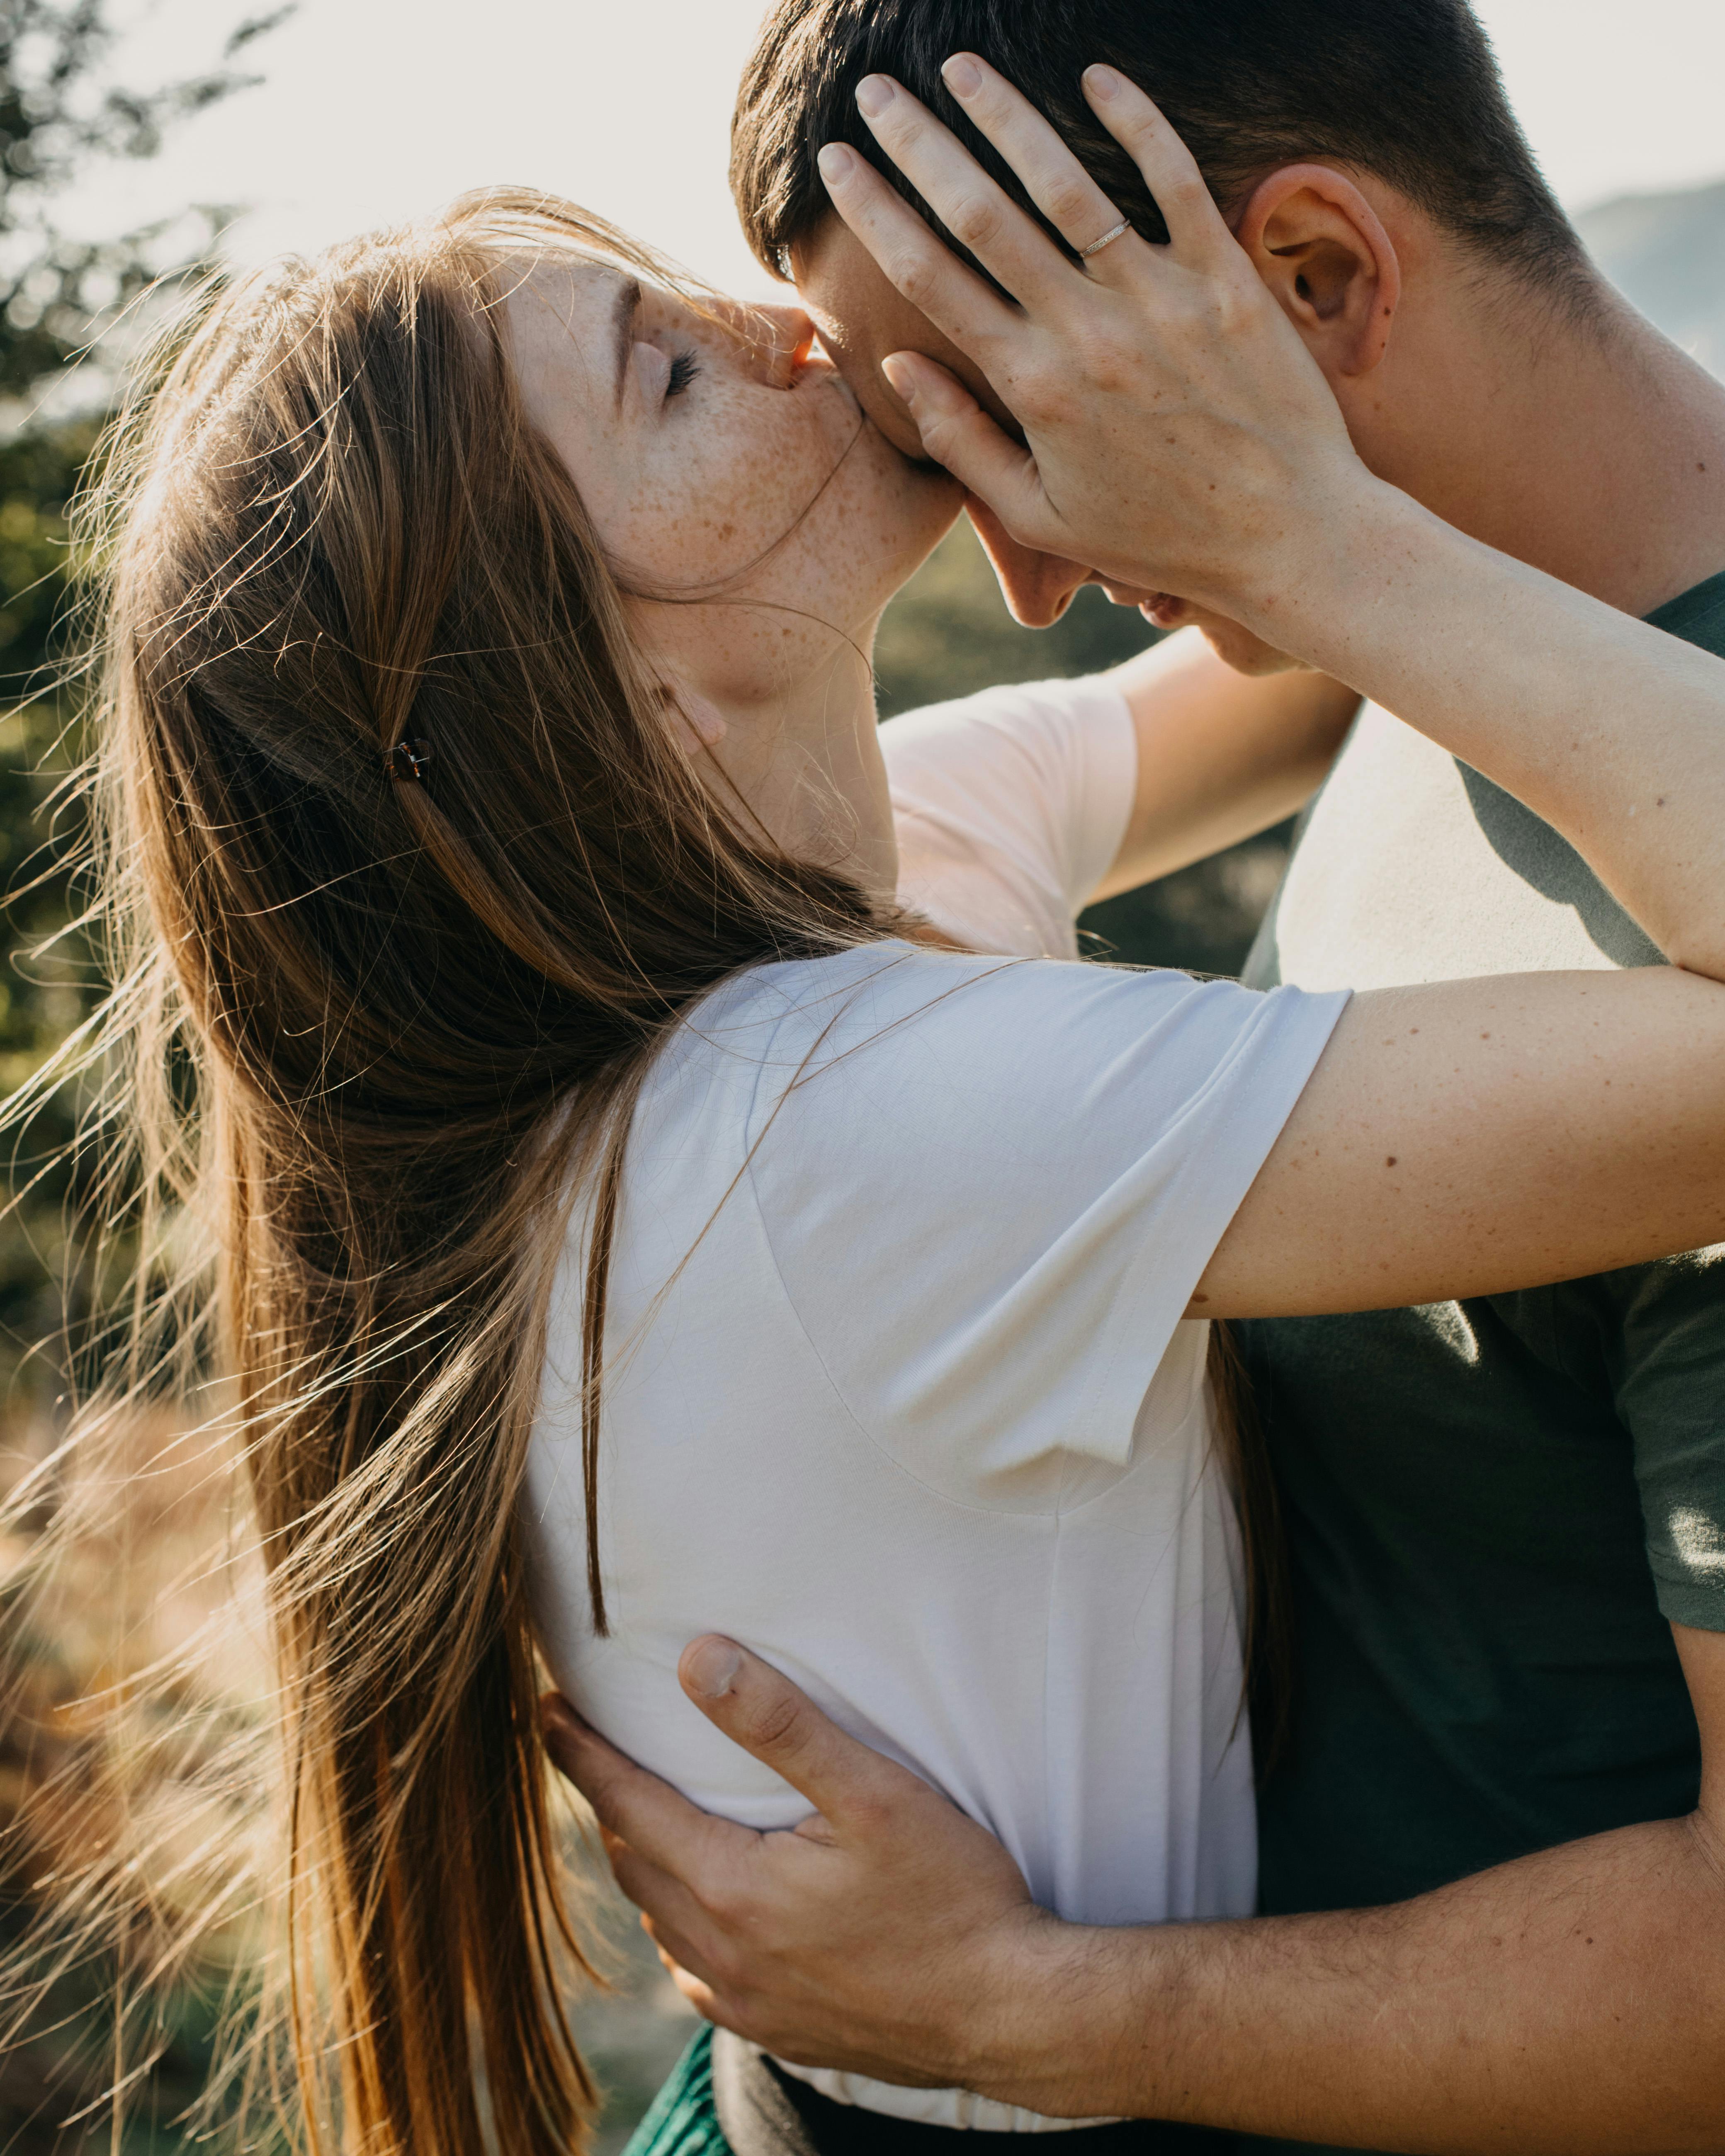 A woman kissing her partner on his forehead | Source: Pexels